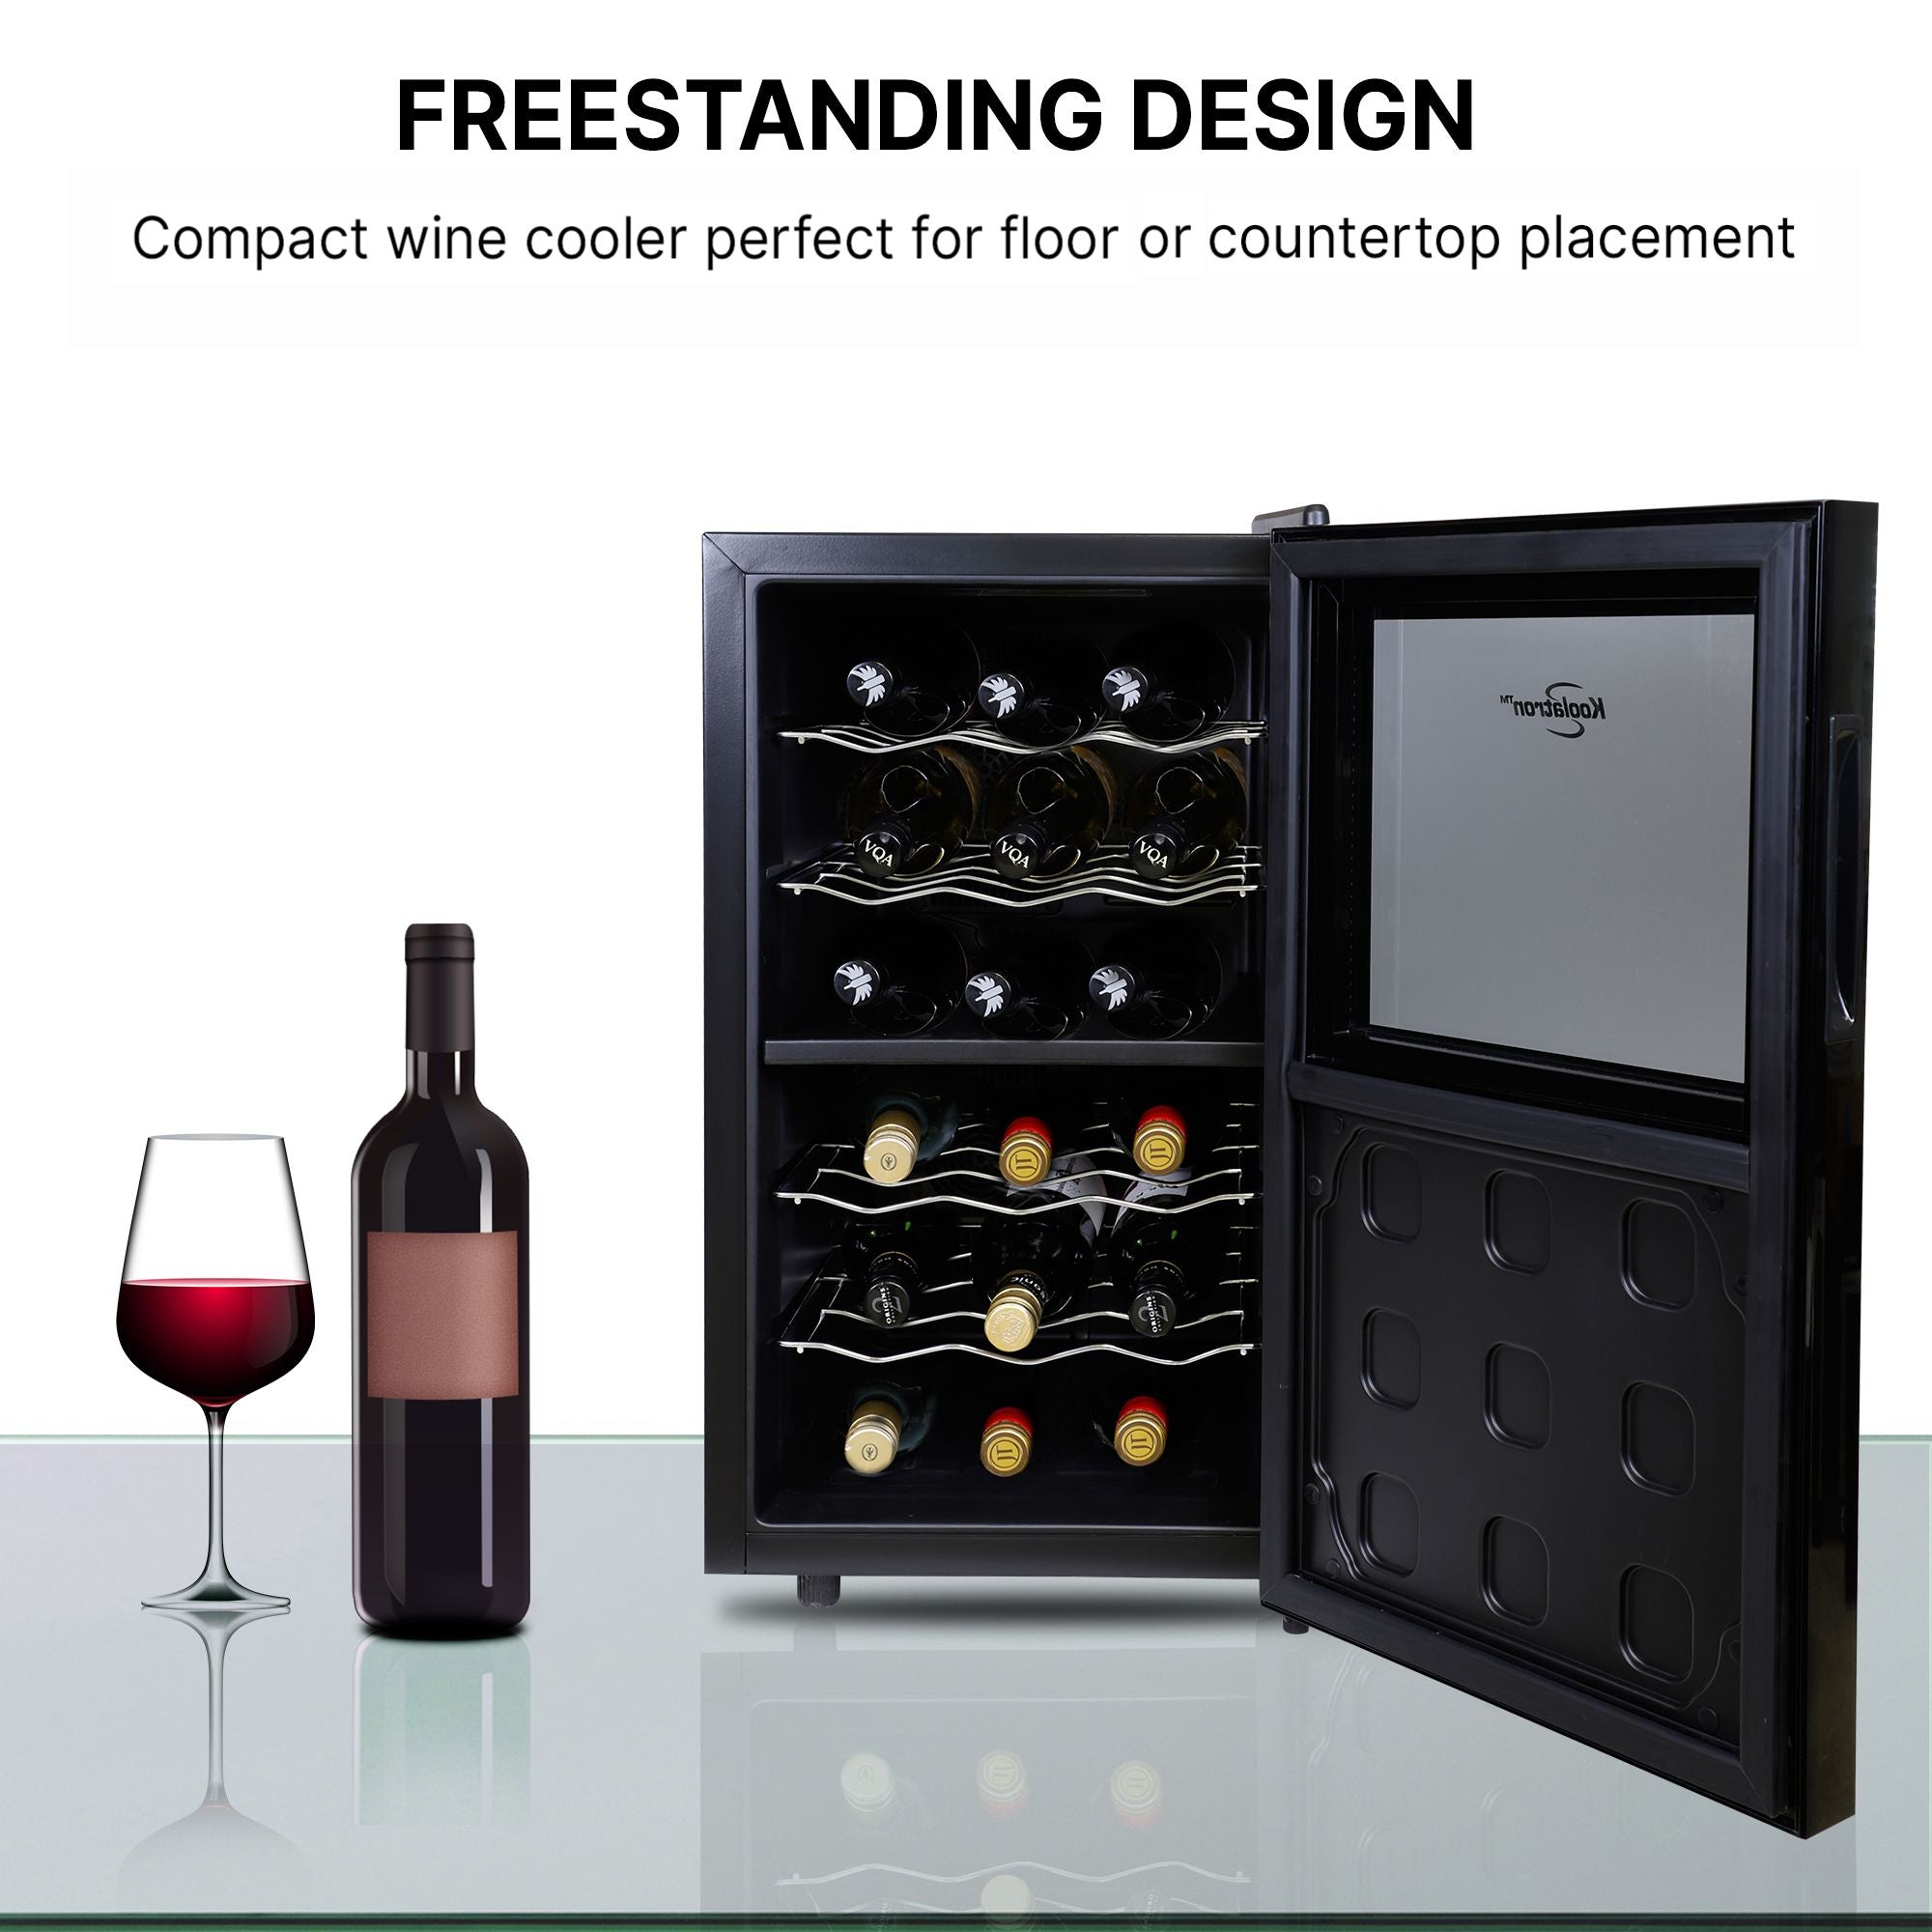 Koolatron 18 bottle wine cooler, open, with a bottle and glass of red wine to the left; Text above reads "Freestanding design: Compact wine cooler perfect for floor or countertop placement"